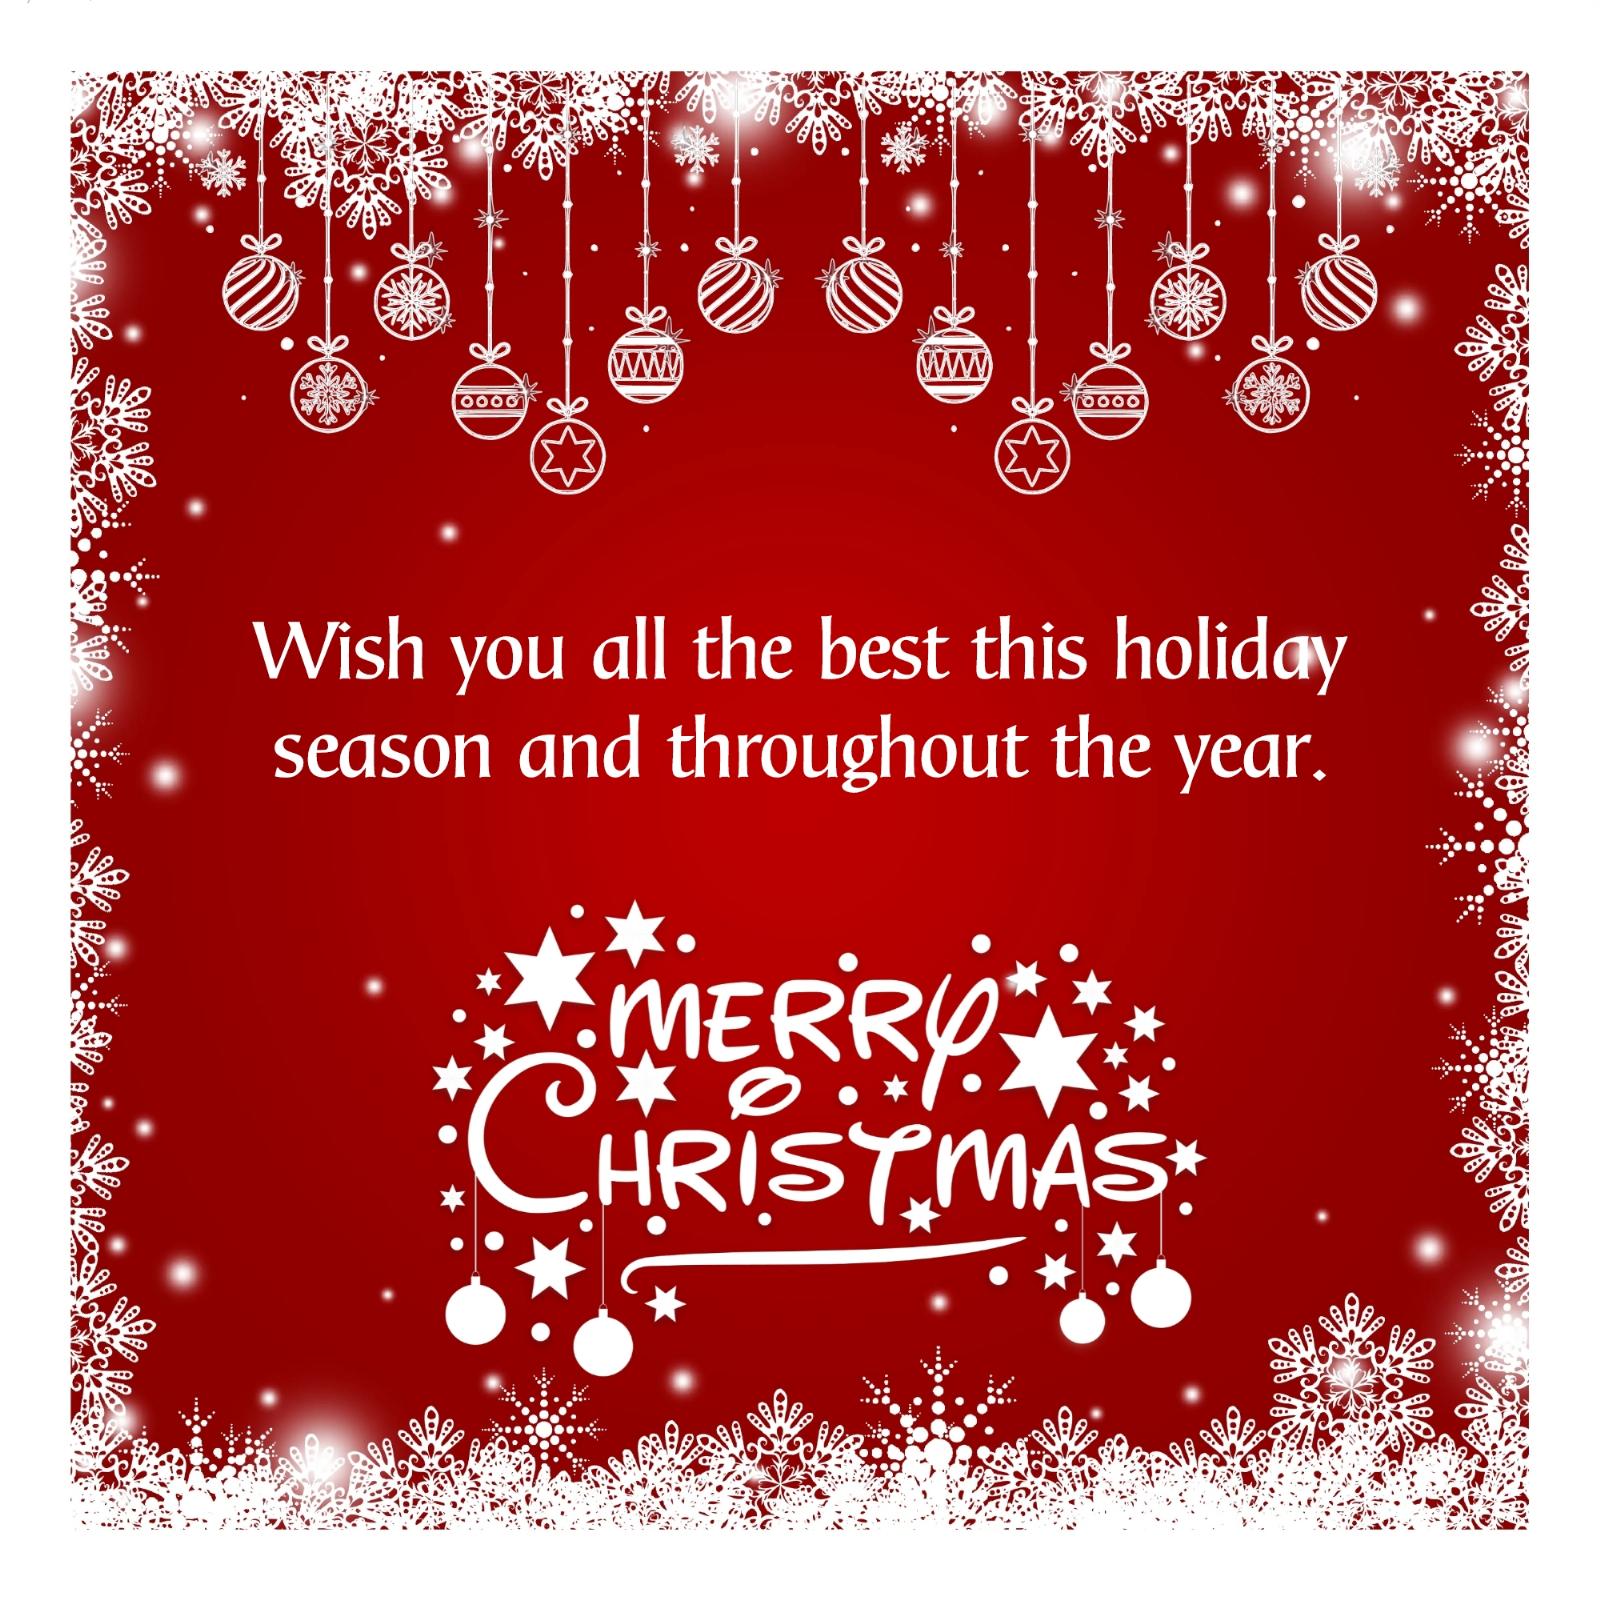 Wish you all the best this holiday season and throughout the year